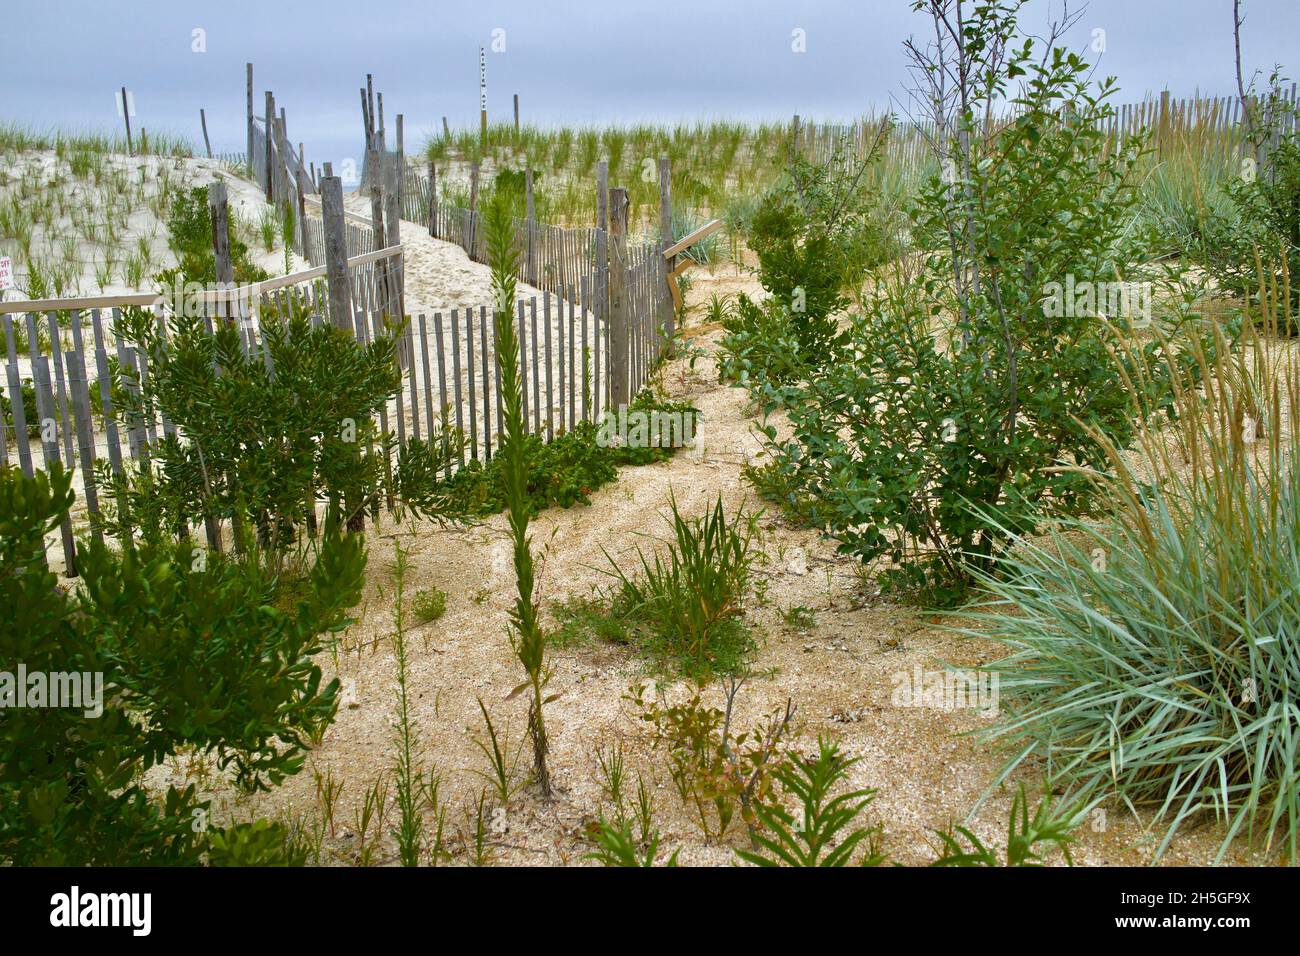 Wooden Beach or Dune Fence protects dune in Long Beach Island, NJ, USA. Dune grass and other native plants growing in the sand. Stock Photo